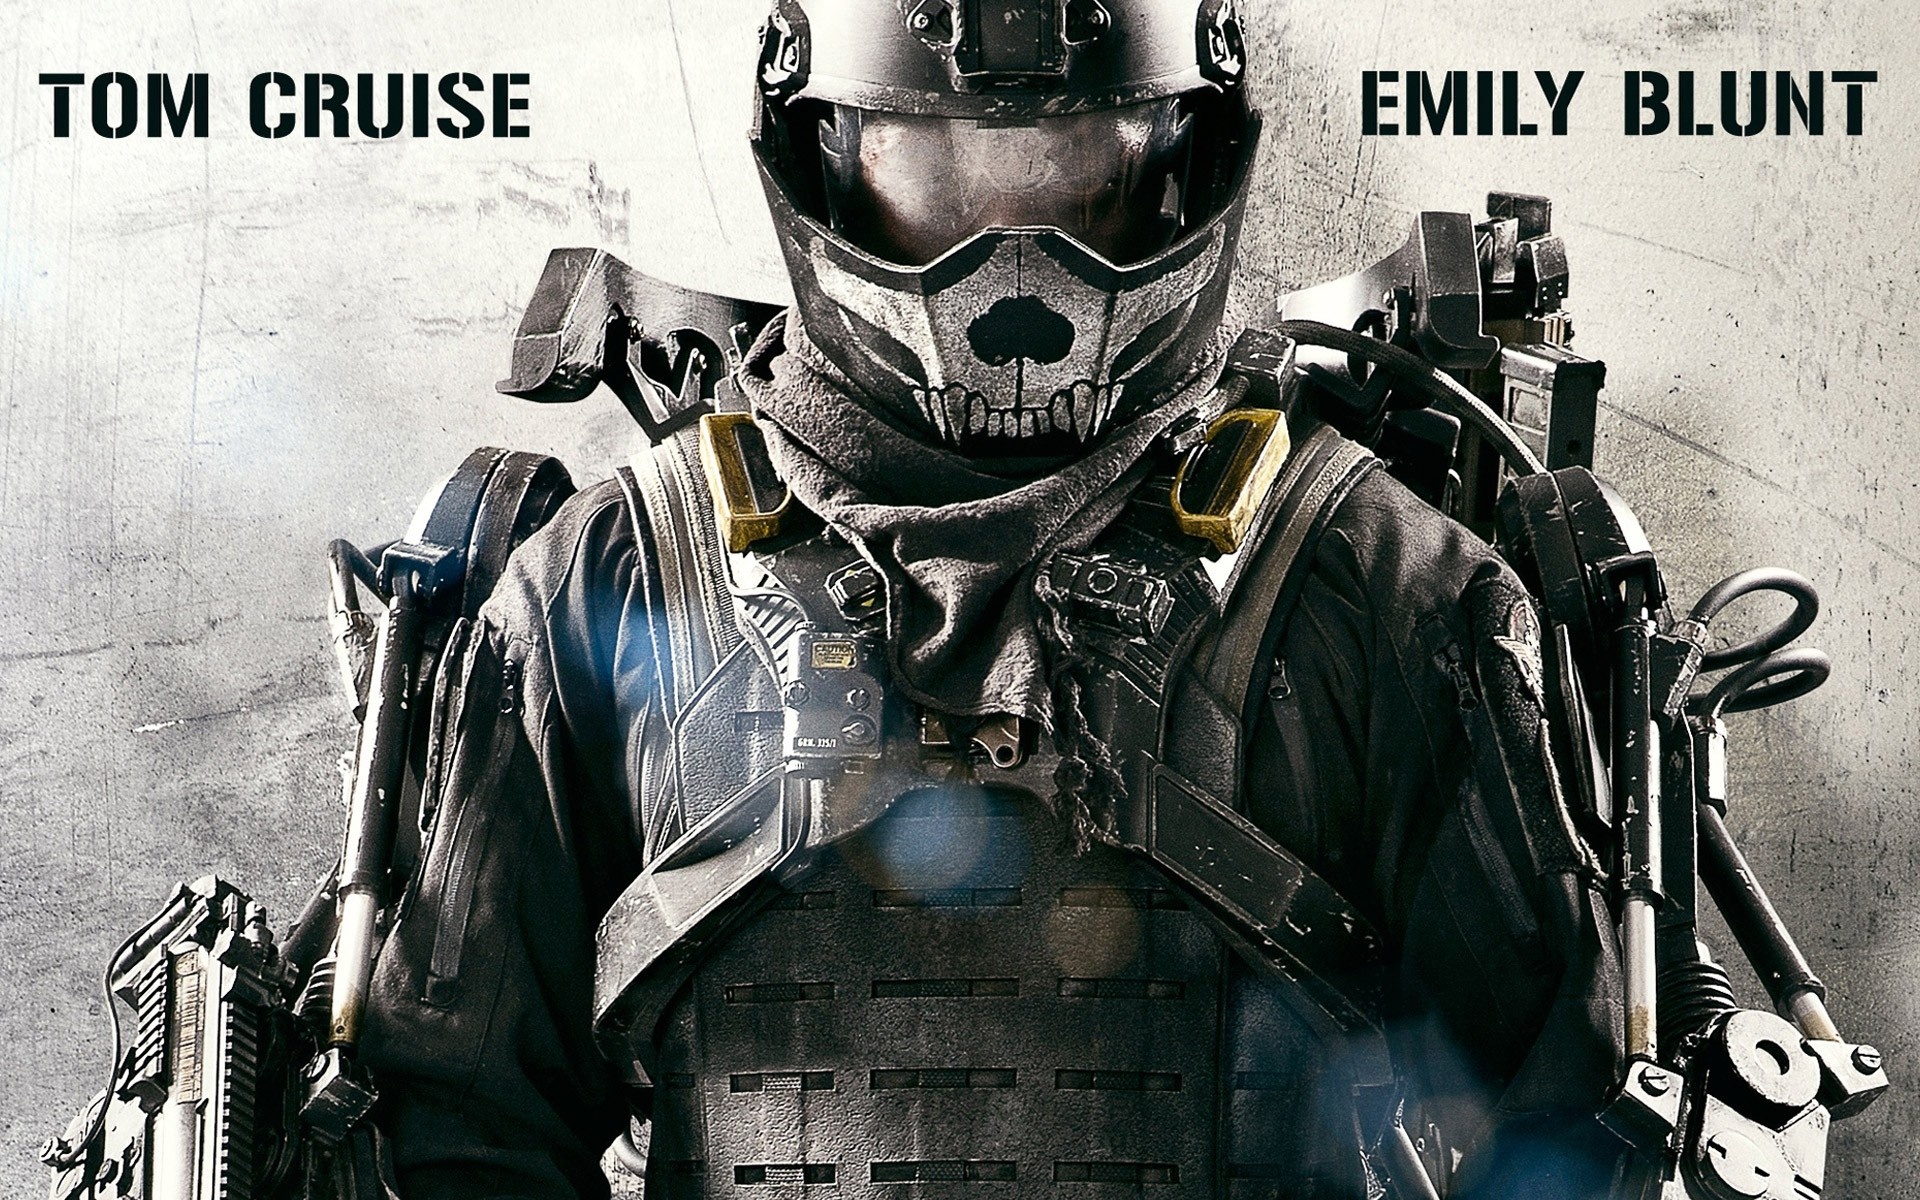 Edge of Tomorrow: Cruise's character, The mission to kill aliens called “Mimics”. 1920x1200 HD Wallpaper.